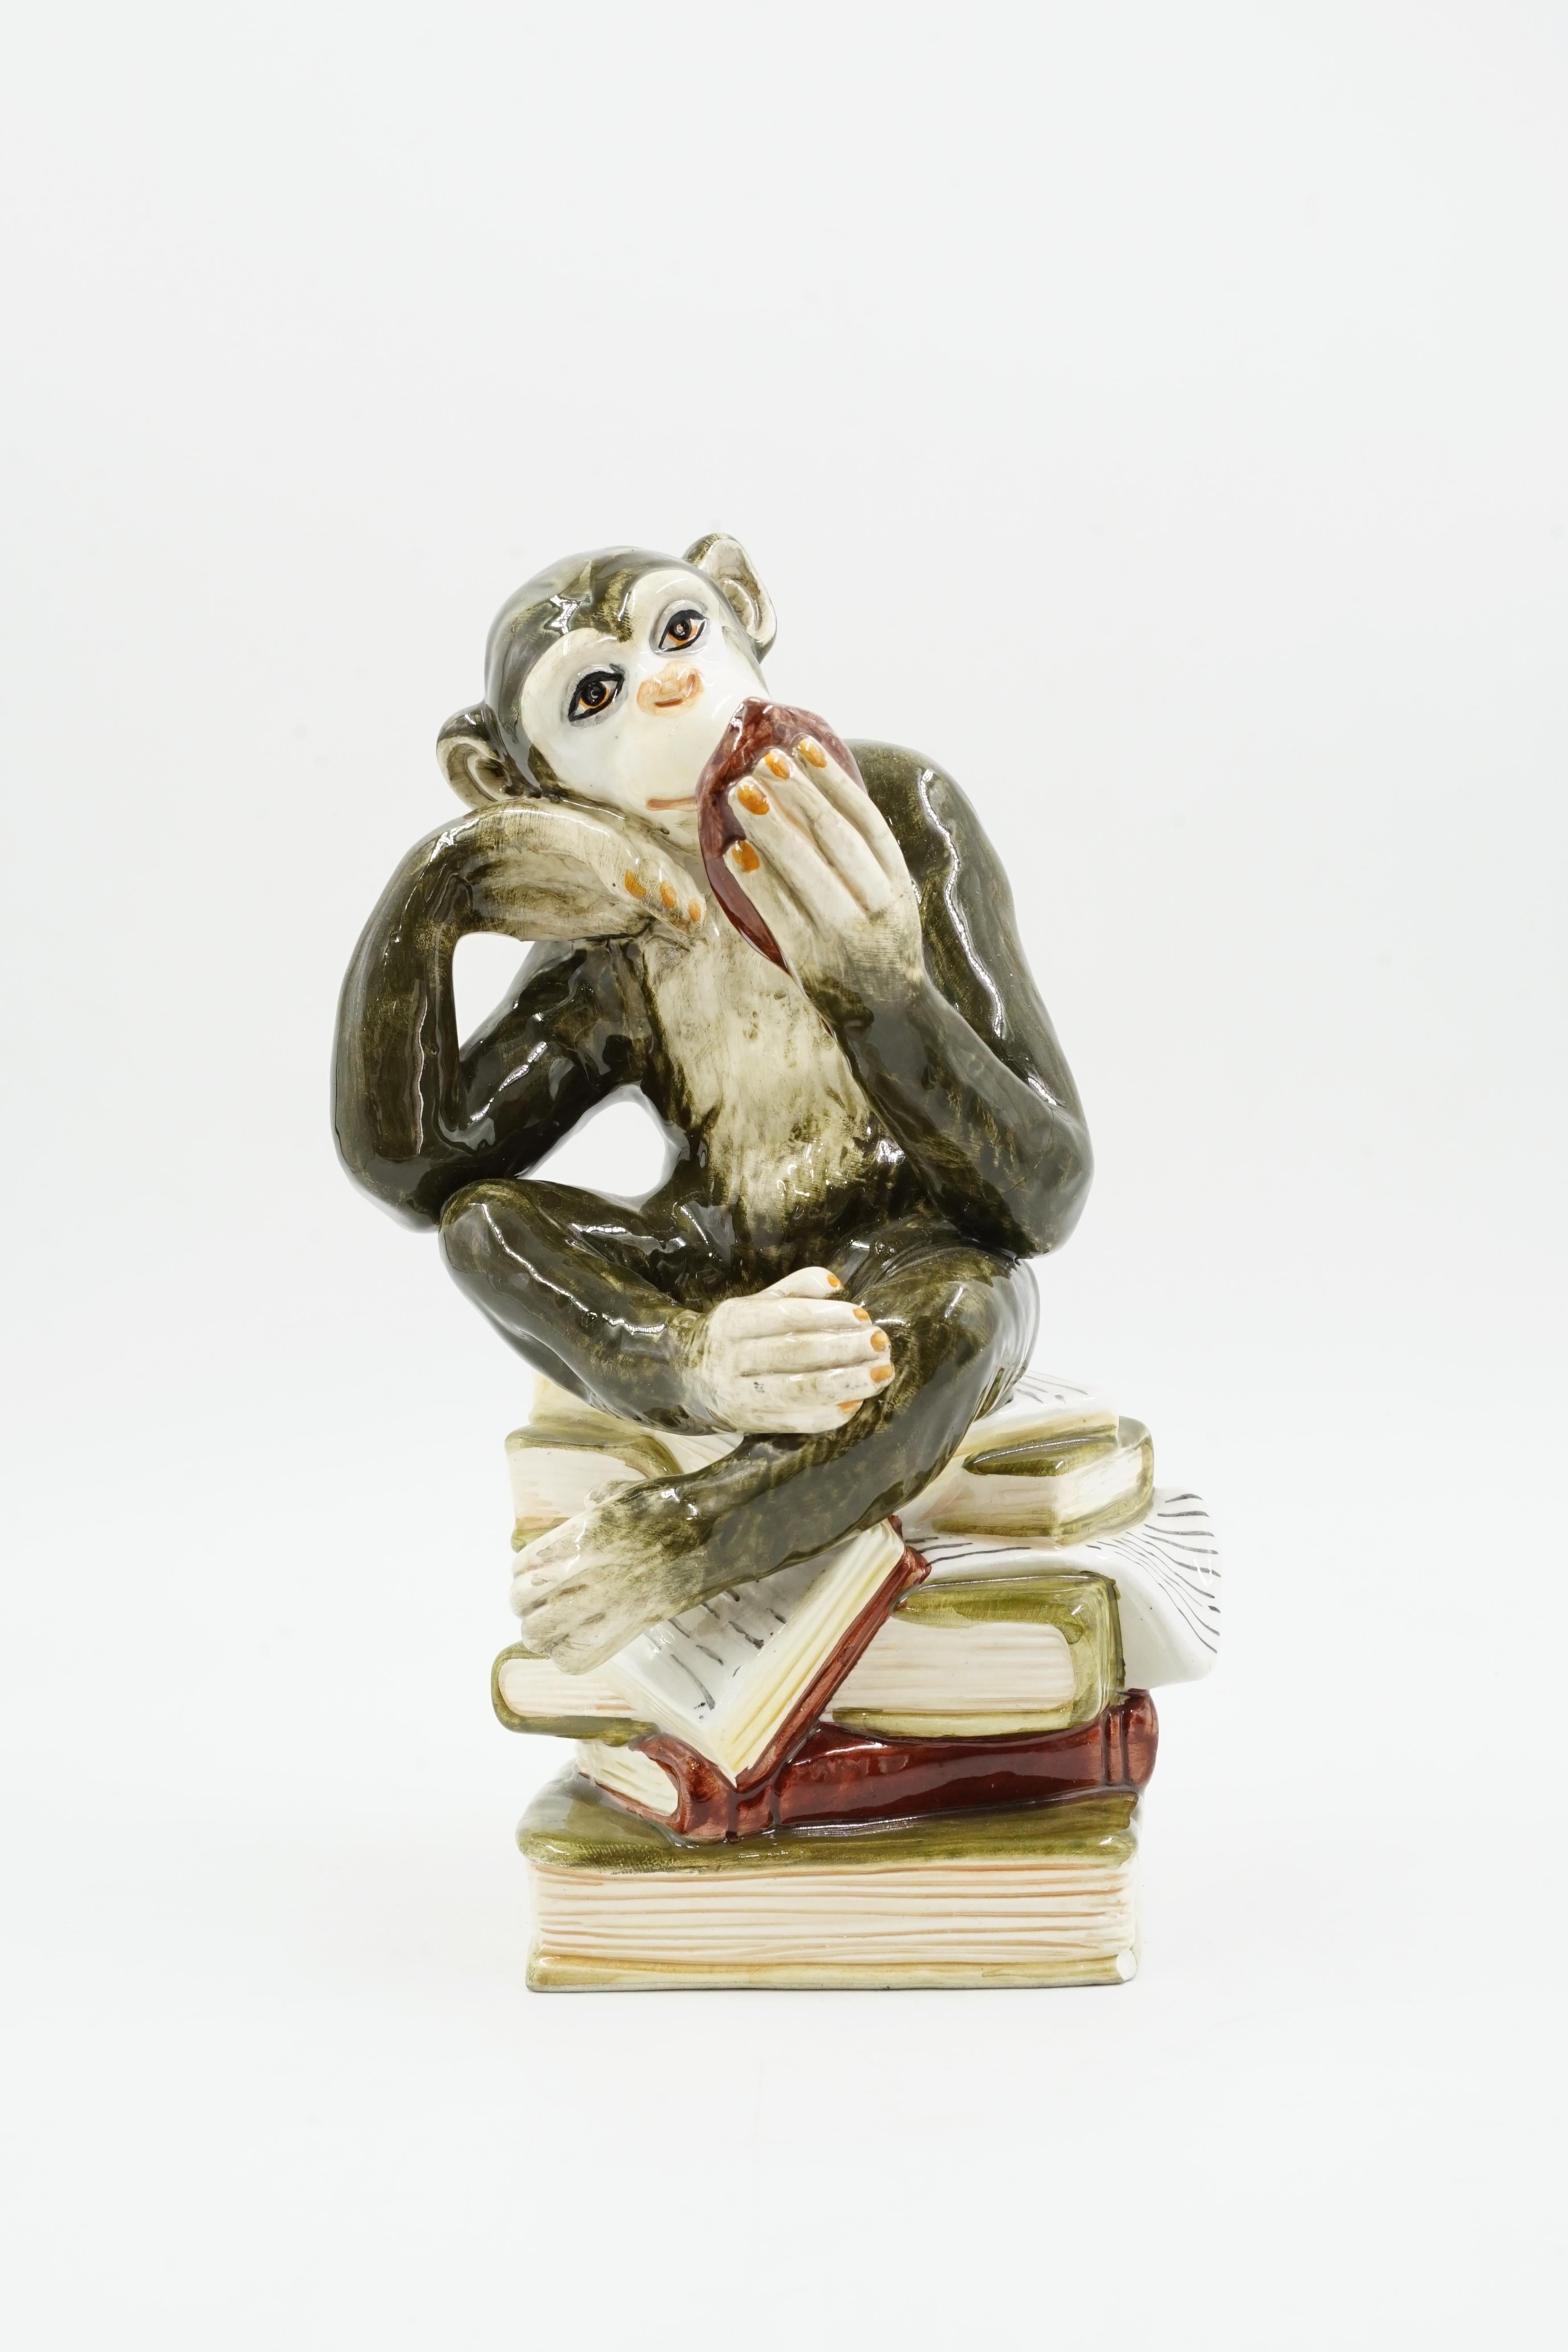 ceramic monkey sculpture
Wise monkey model
unusual figure of a monkey sitting on books and looking in the mirror
hand painted
excellent condition
circa 1950 origin Germany
glazed ceramic materials
Enamel and glaze, as a glaze technique or porcelain